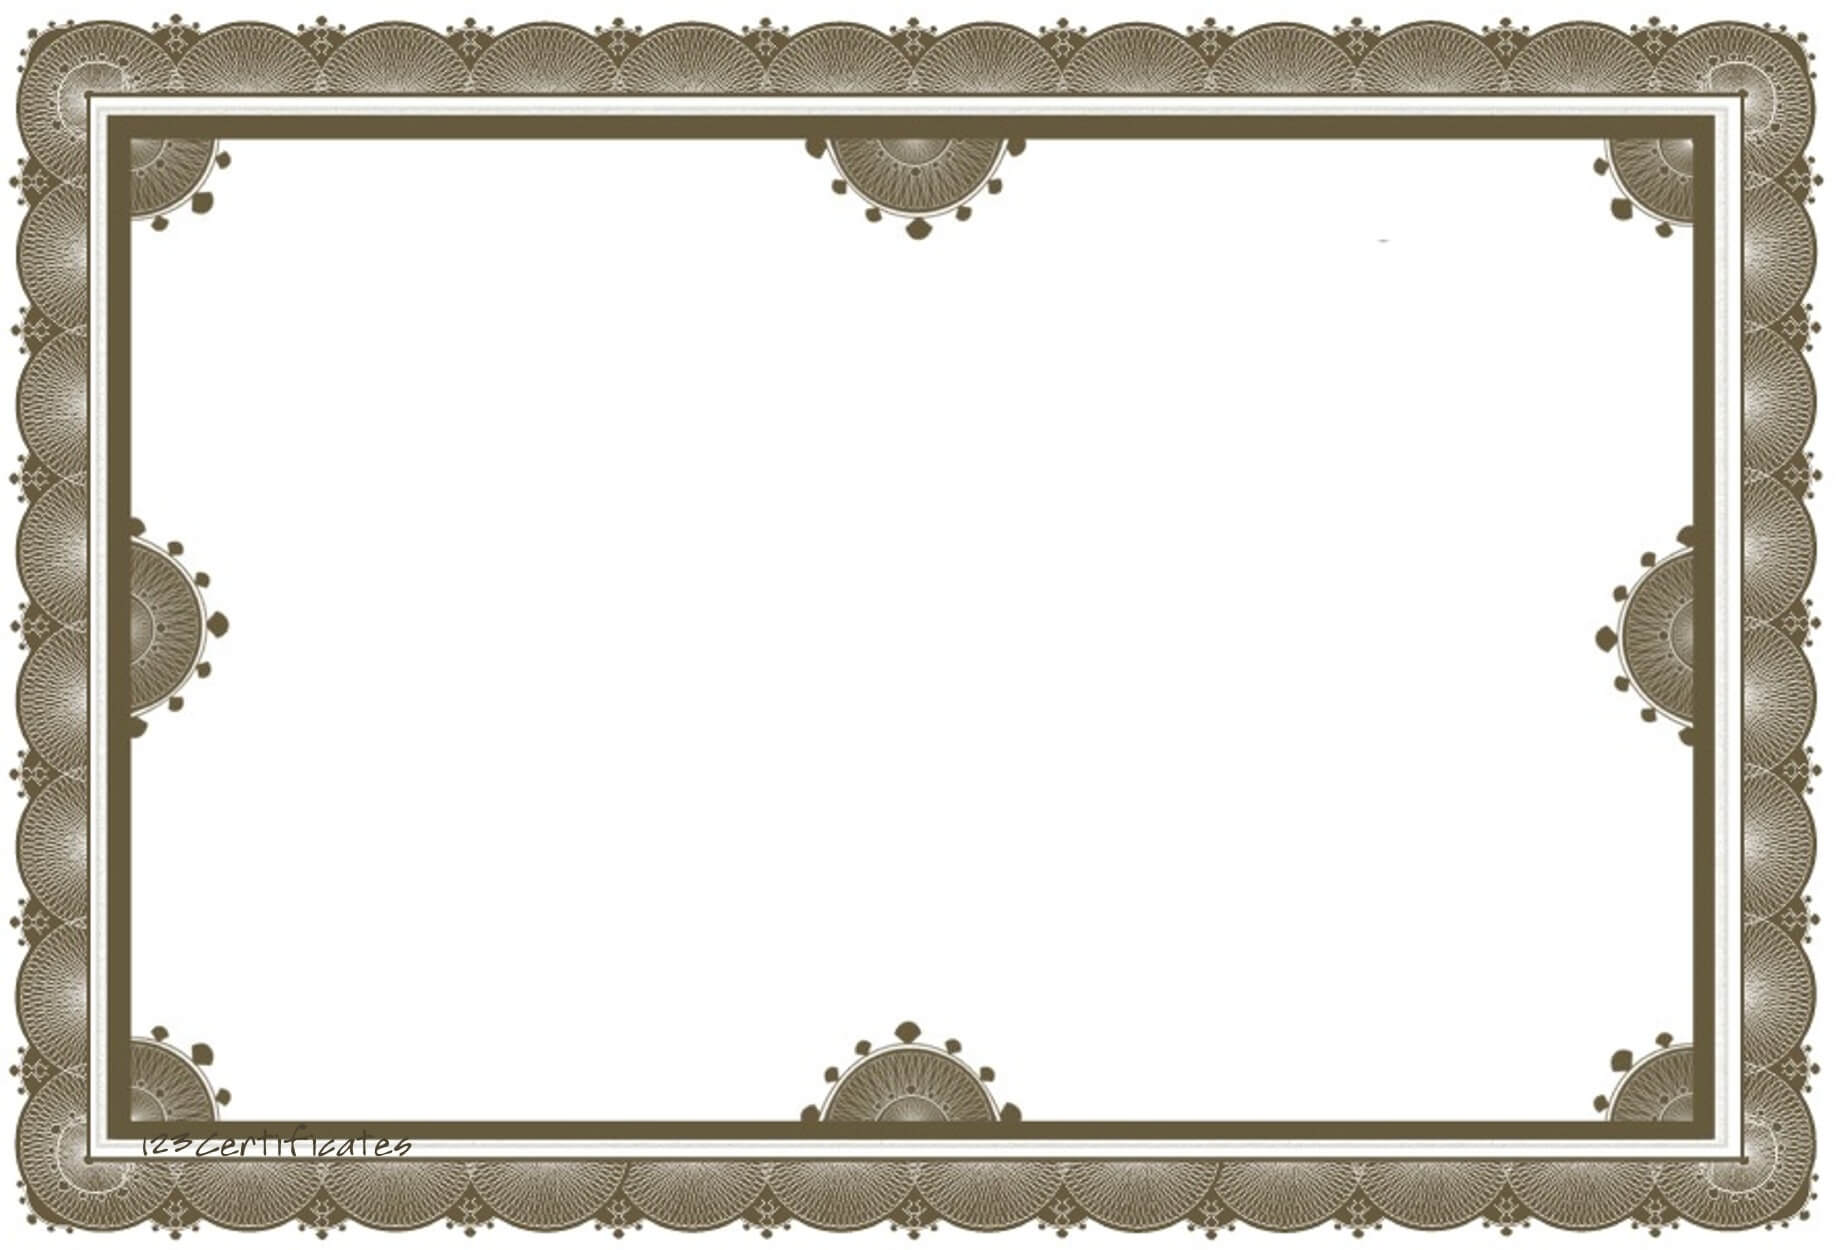 33 Notable Images Of Certificate Borders With Award Certificate Border Template